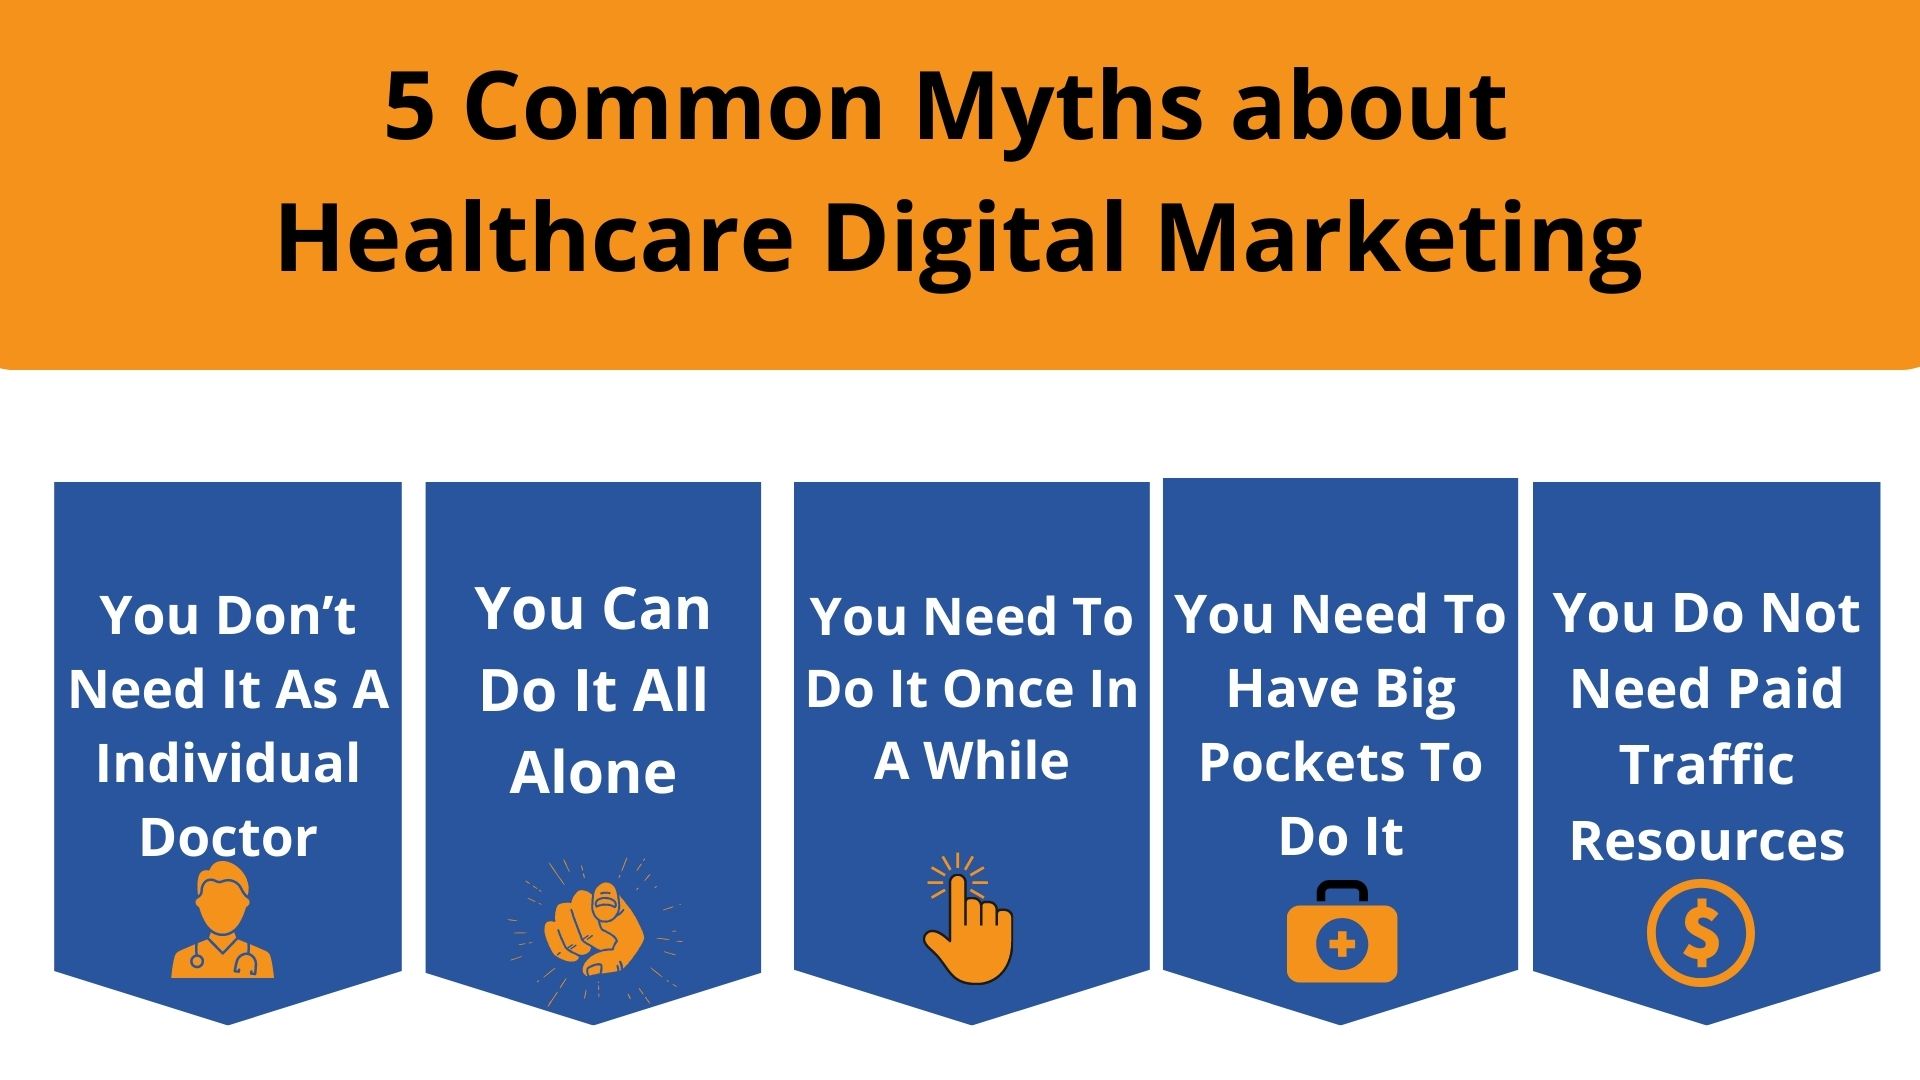 Common Myths about Healthcare Digital Marketing